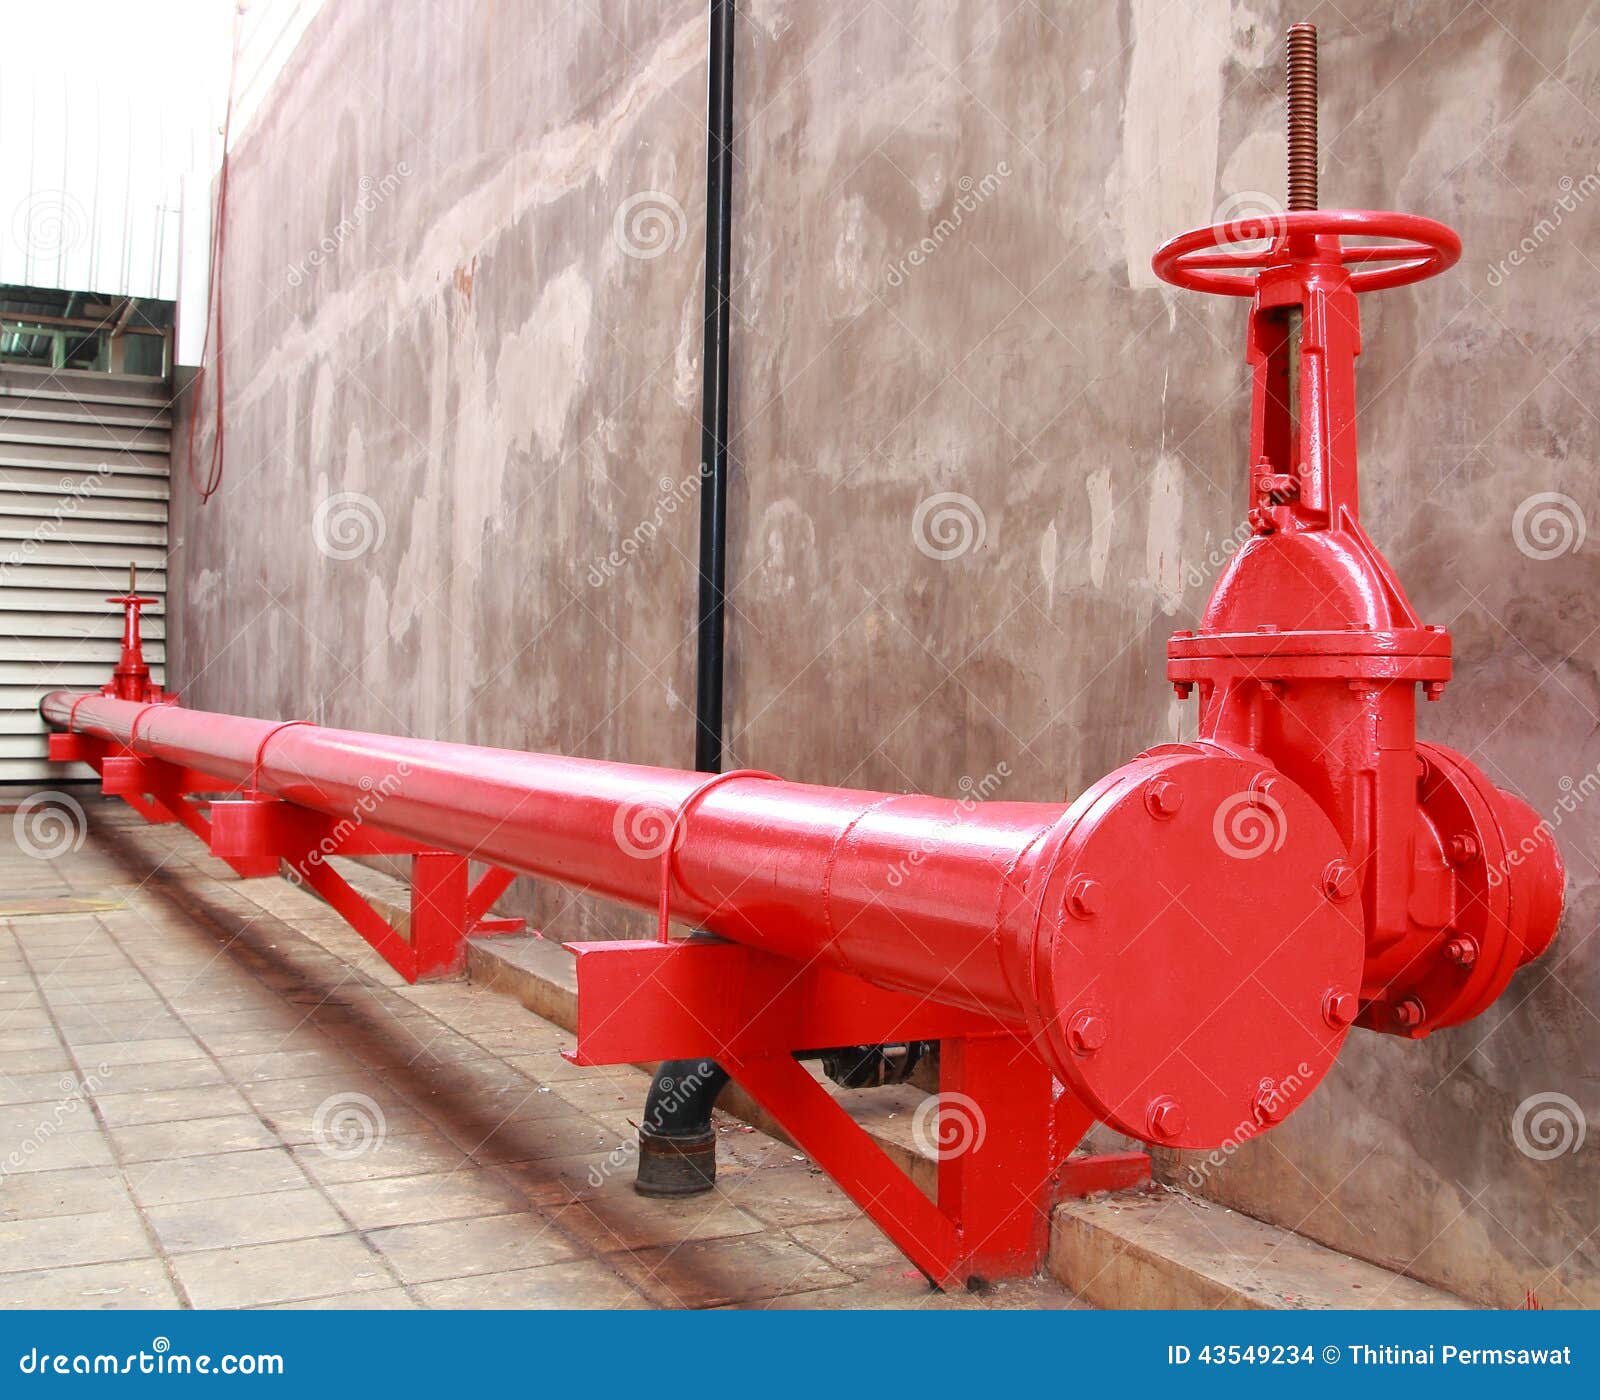 Pipe And Valve Of Fire Fighting System Stock Photo - Image ...